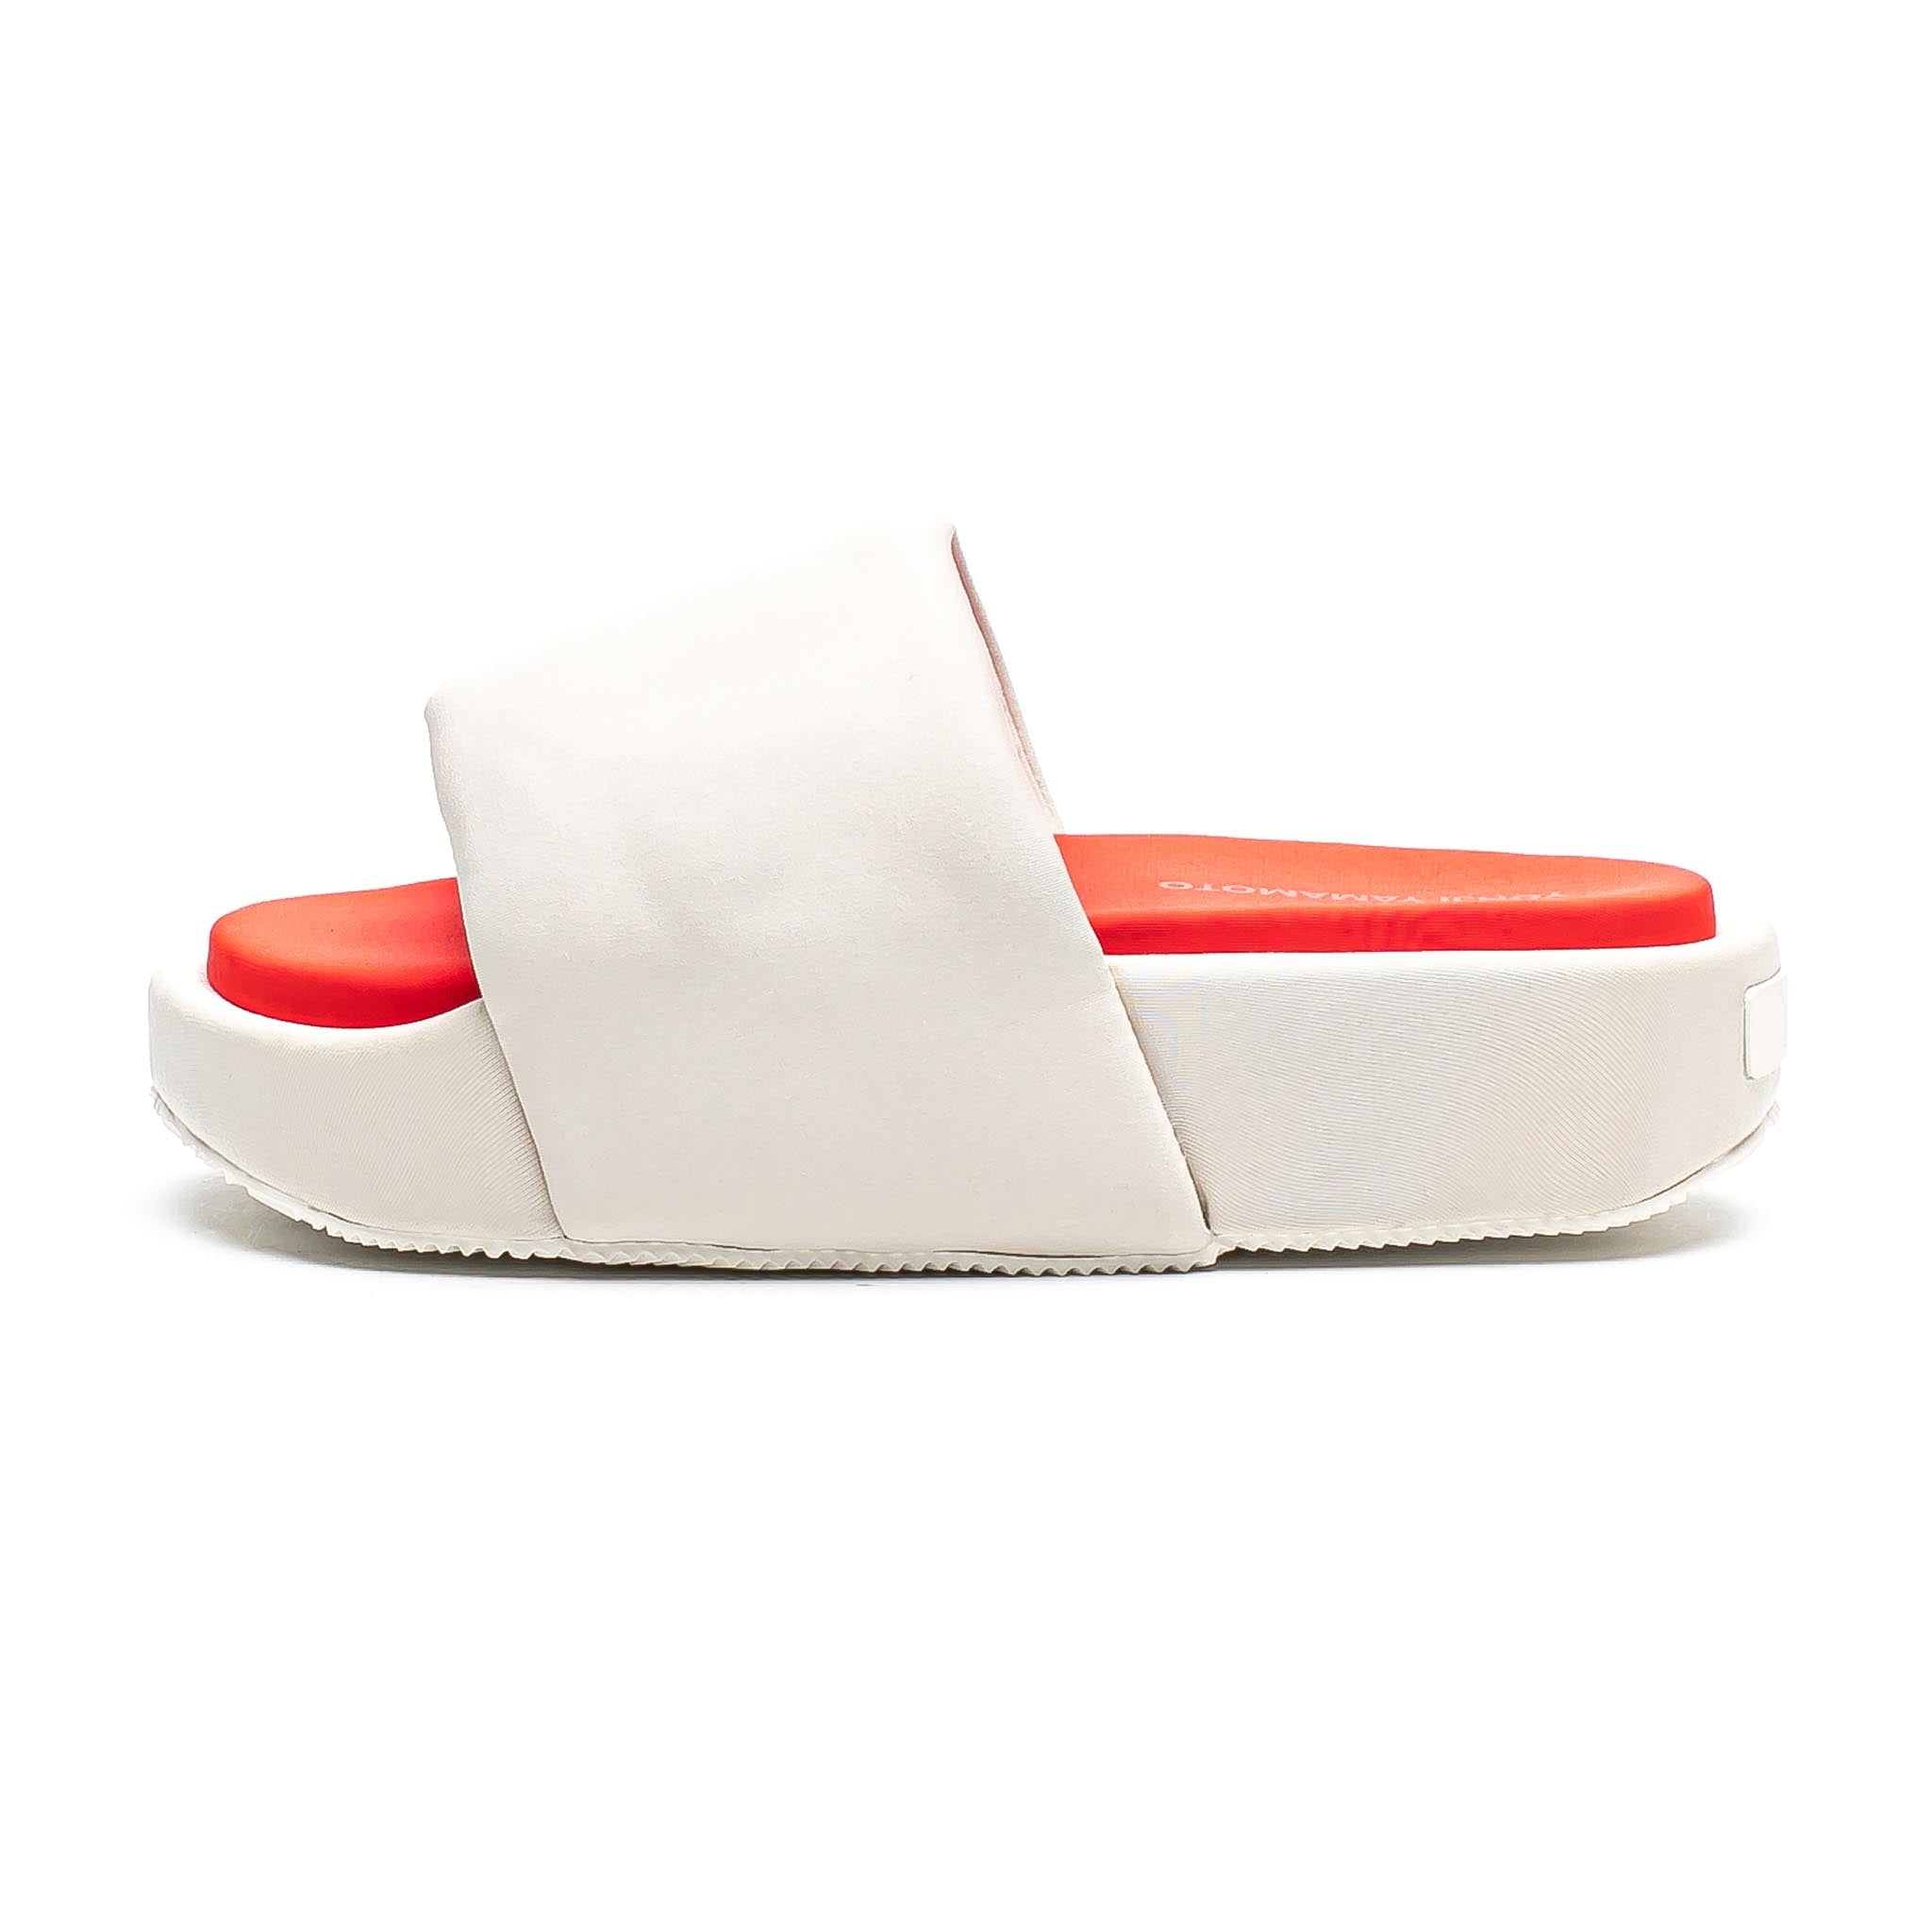 ADIDAS Y-3 Slides Cleabrown/Red